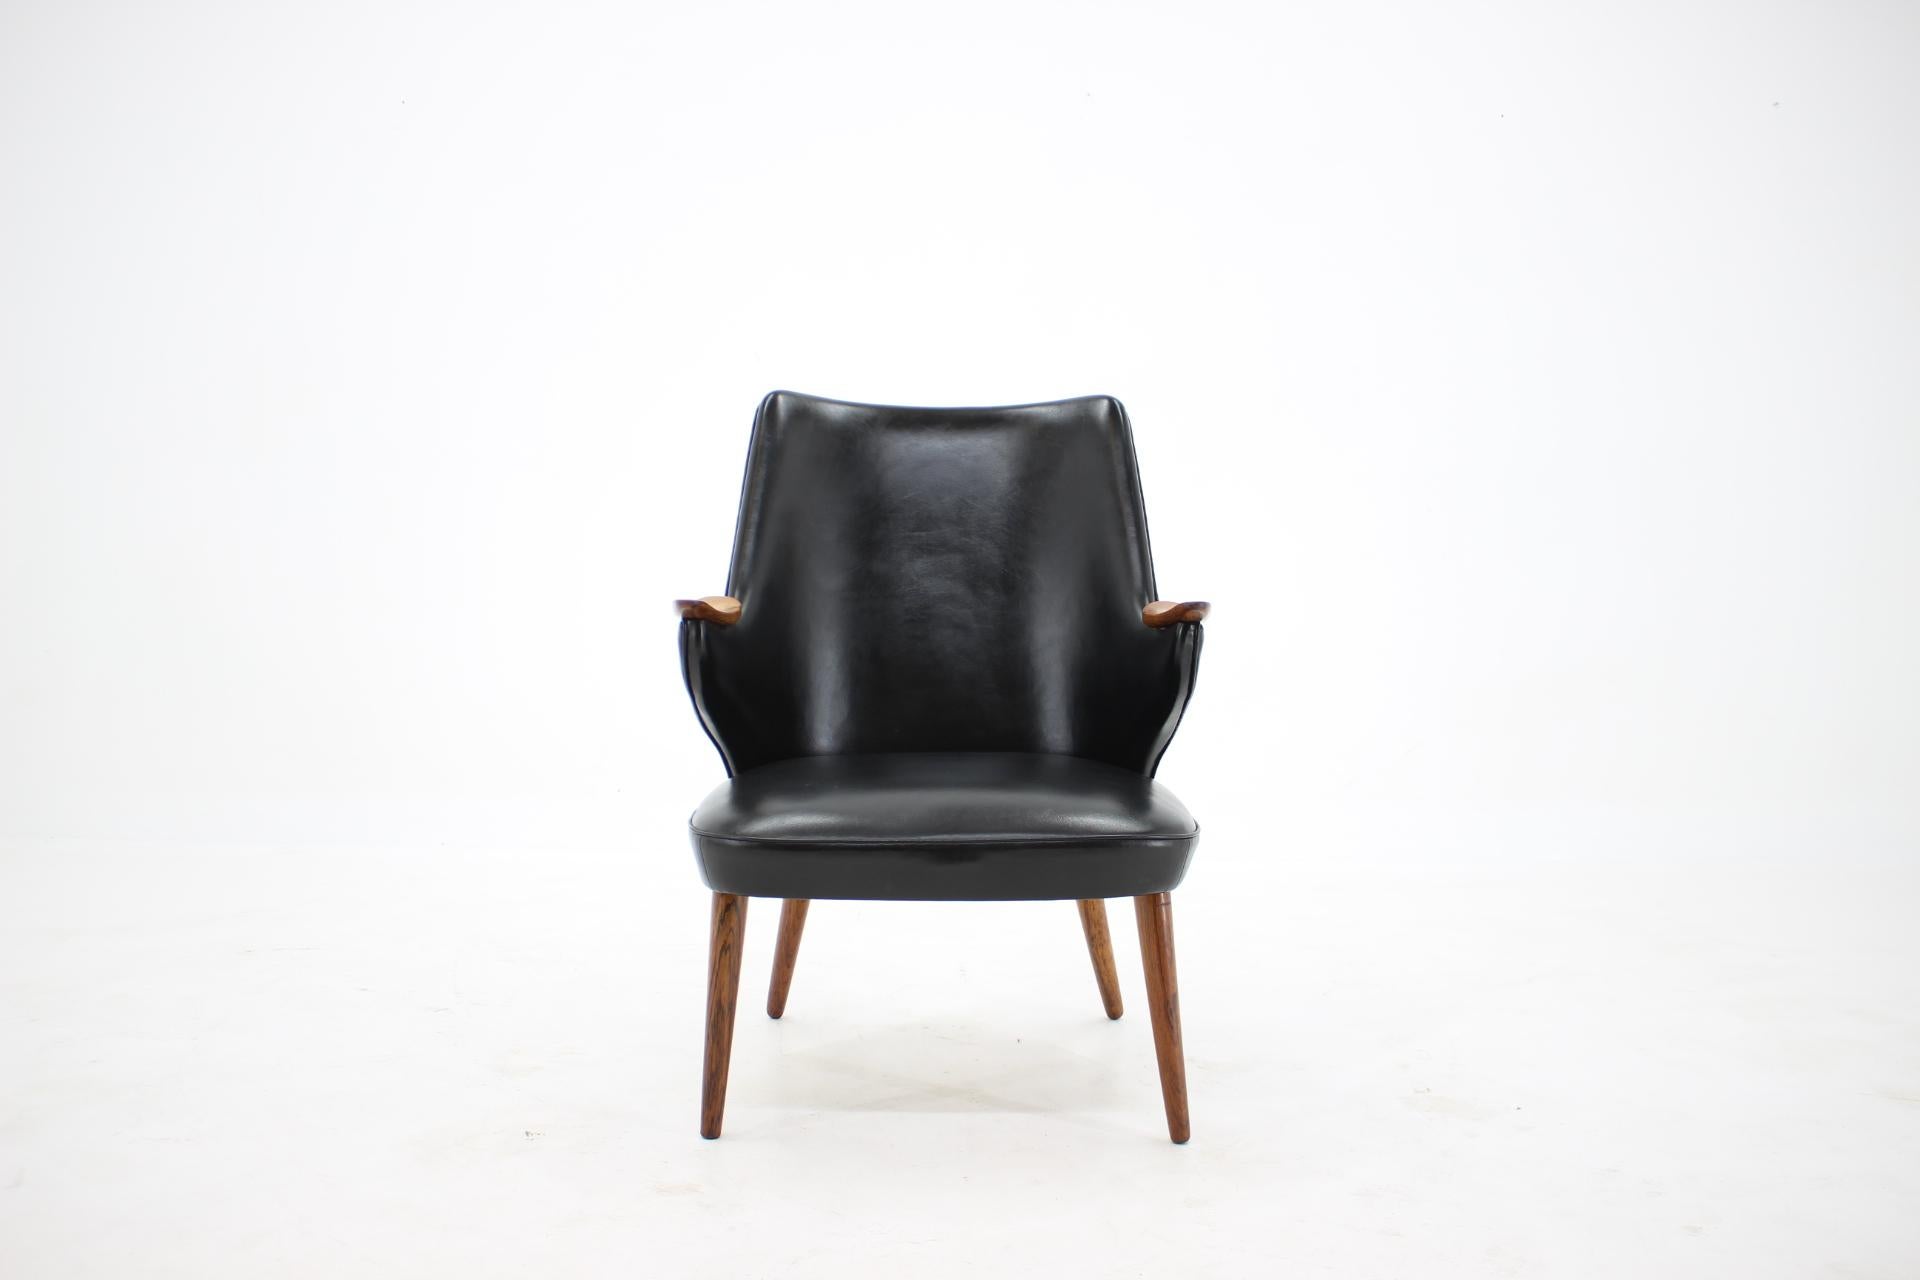 - Good original leatherette upholstery 
- Repolished wooden parts 
- High of seat 38 cm.